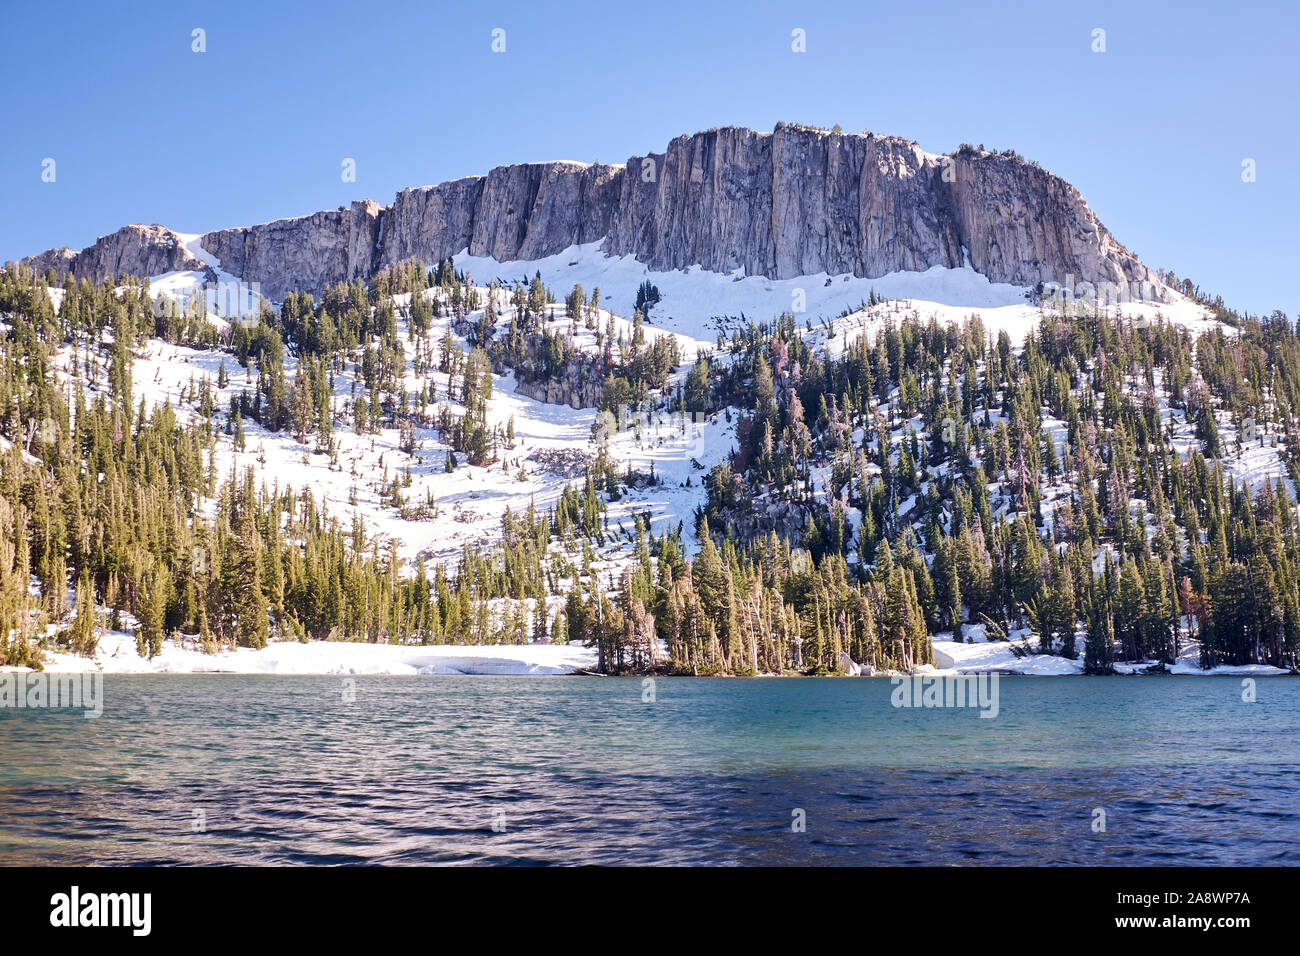 View of Mammoth Lakes and mountians of the Sierra Nevada, California, USA Stock Photo